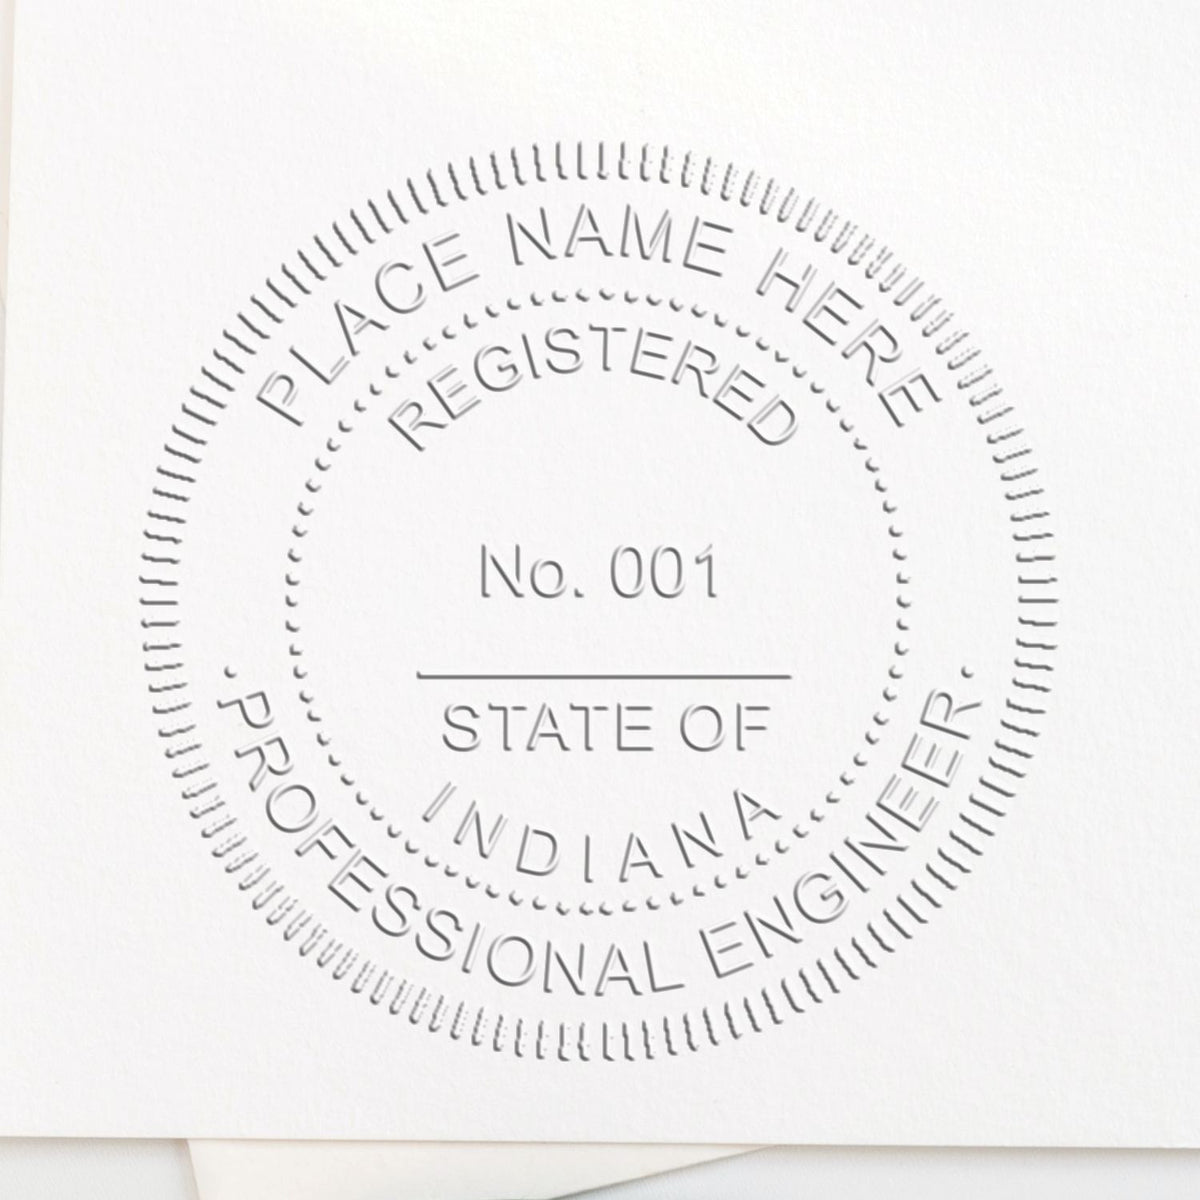 An alternative view of the State of Indiana Extended Long Reach Engineer Seal stamped on a sheet of paper showing the image in use